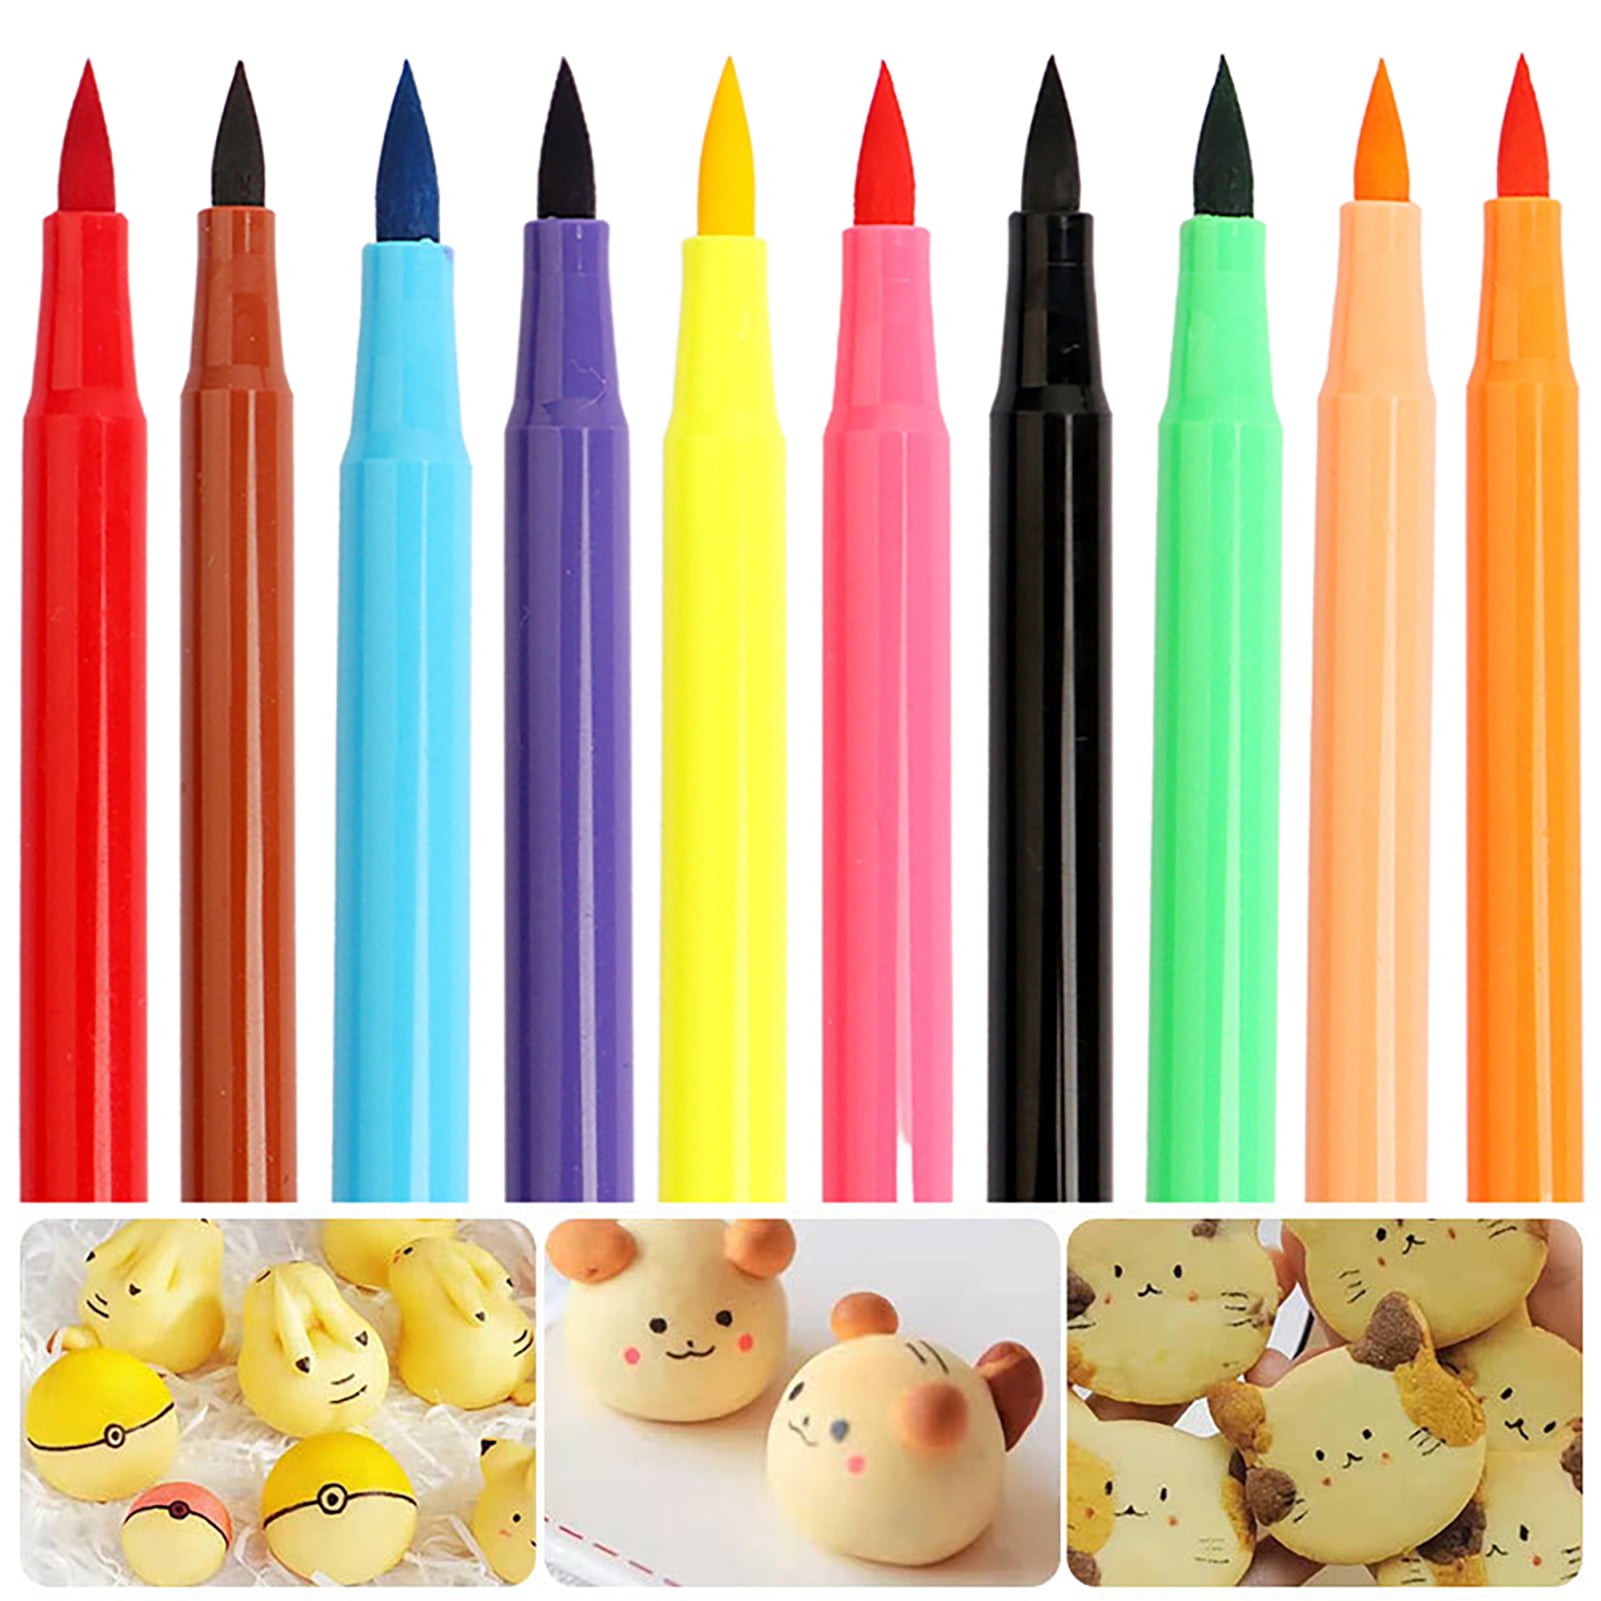 Conditiclusy Cake Painting Pen Colors Food Ink Markers Pigment Pen Brush Accessories Edible Food Pen Cake Decoration DIY Baking Baking - Walmart.com